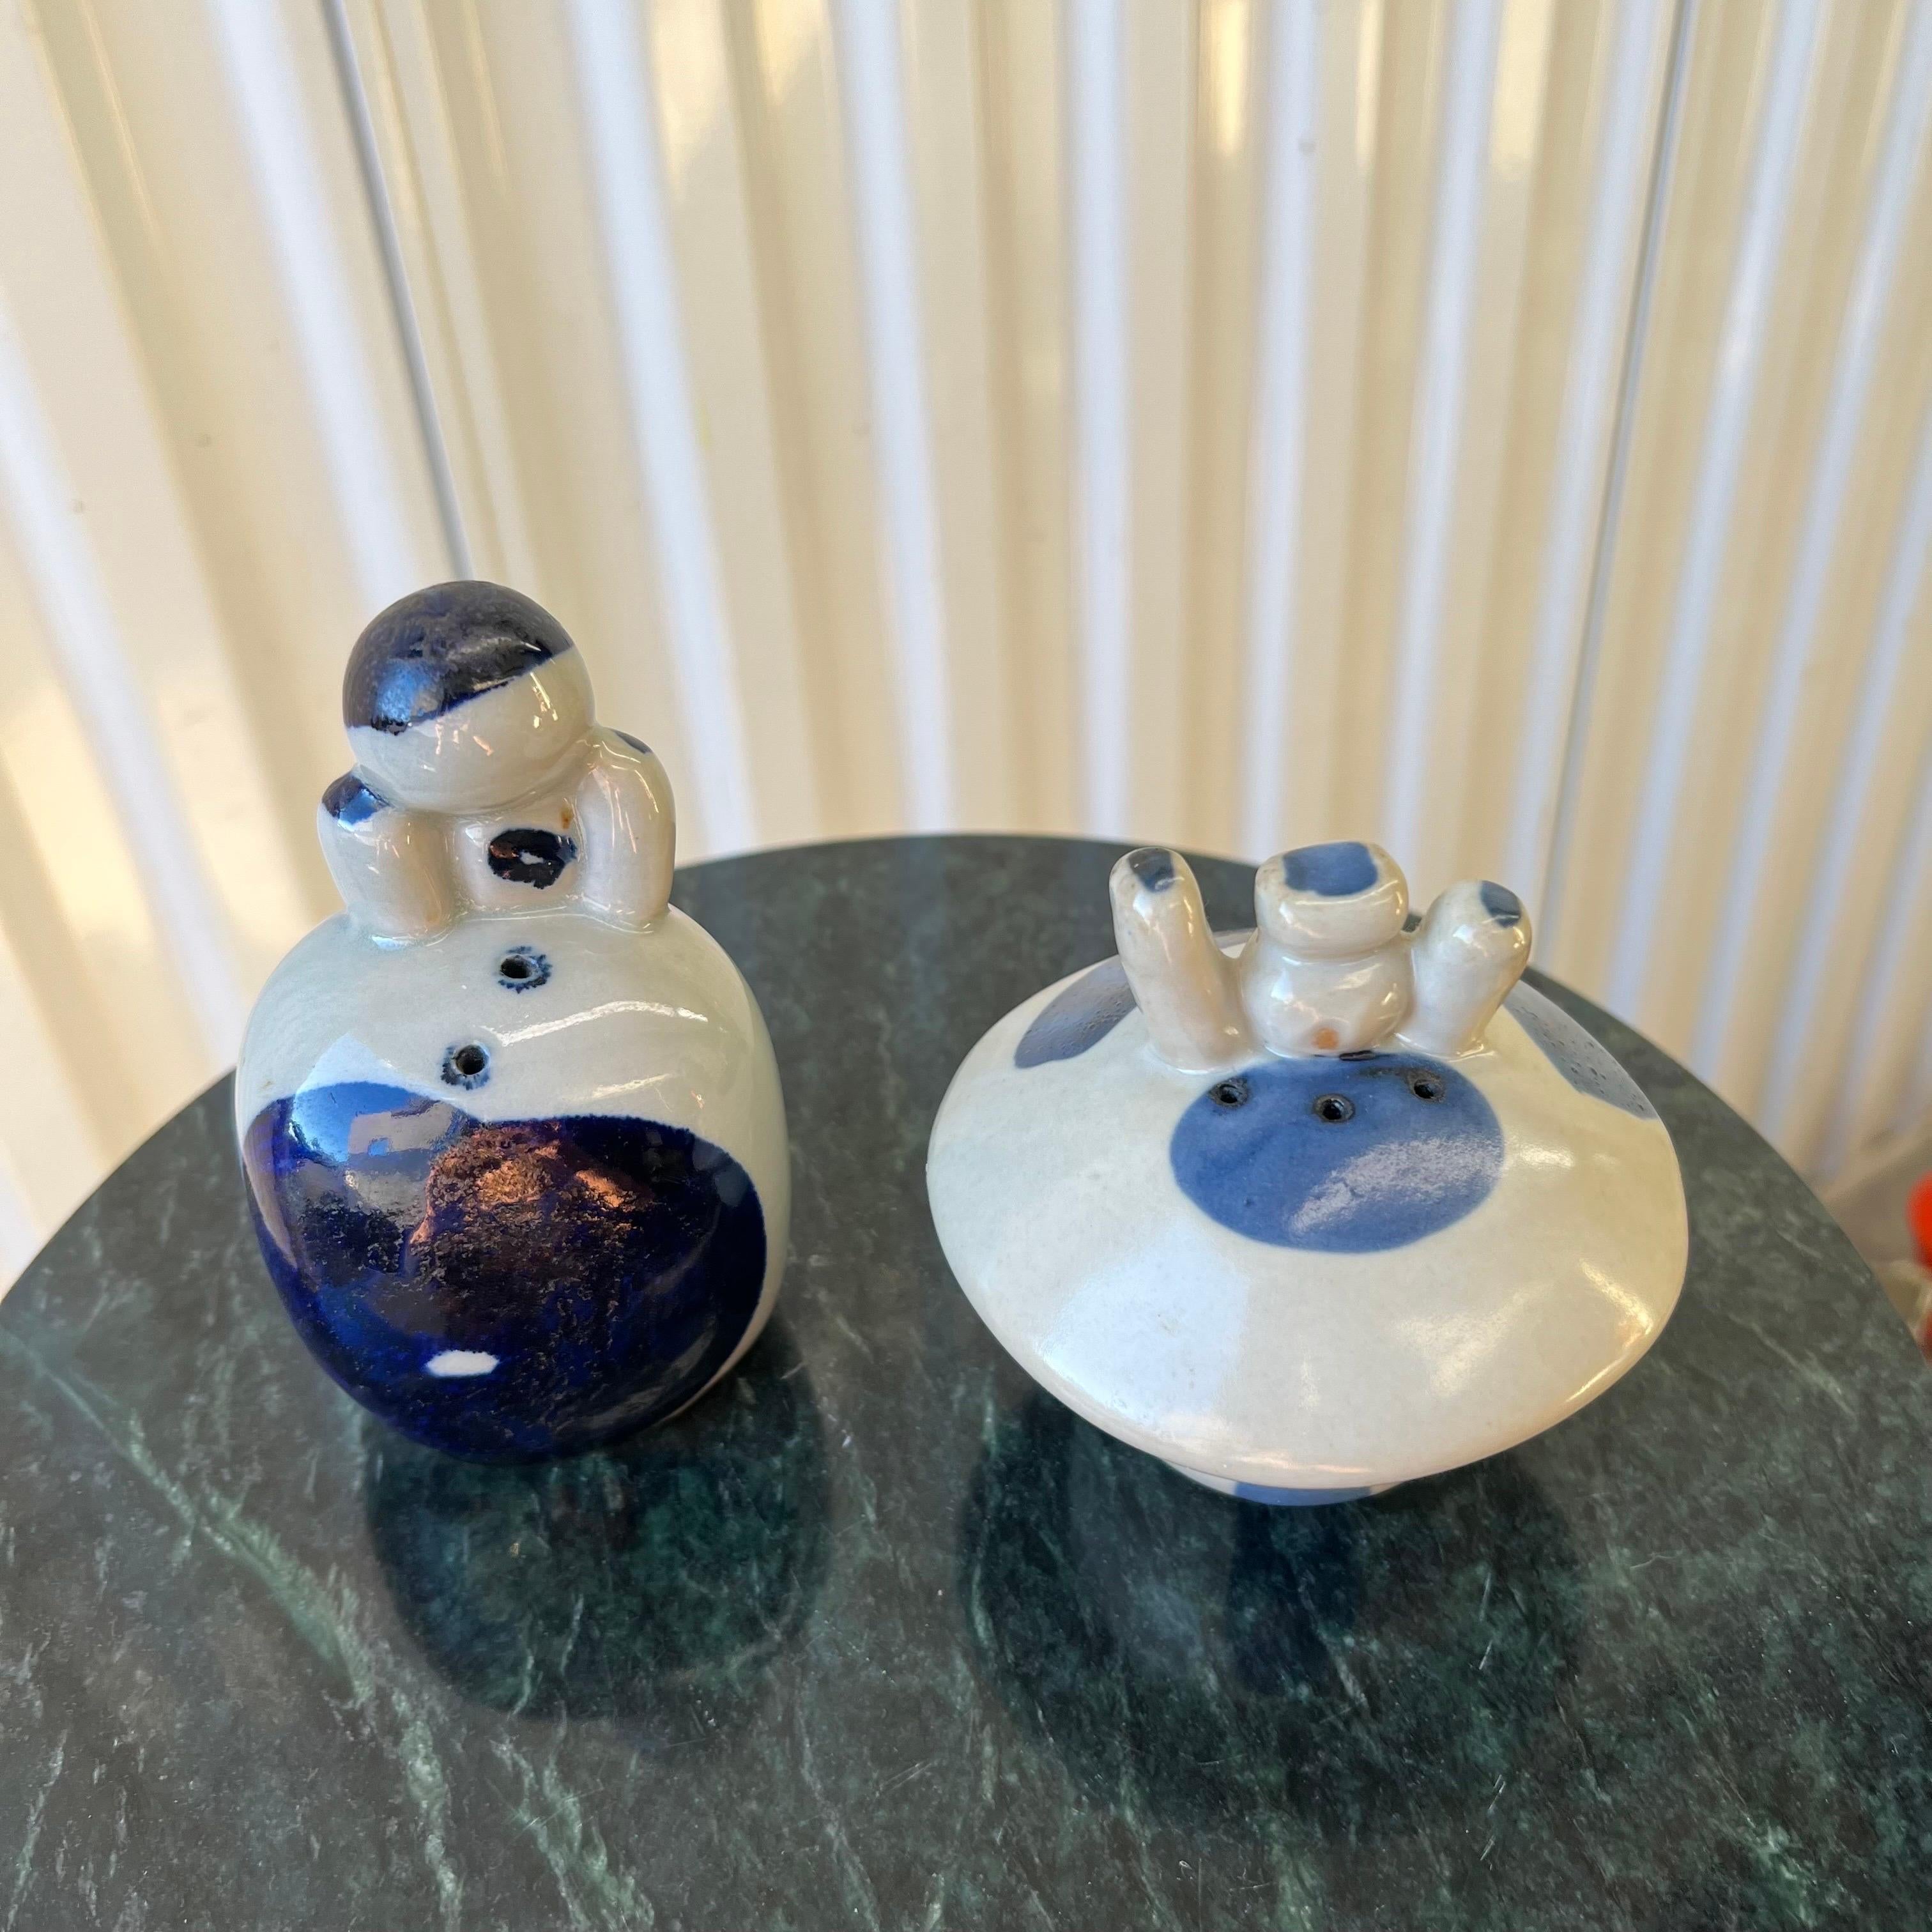 A funky set of glazed stoneware figurative salt and pepper shakers in blue and white delft style.  
The pepper shaker (the taller one) measures: 4.75” tall x 2.75” wide x 2” deep.  The salt shaker measures: 3.75” tall  x 4” diameter